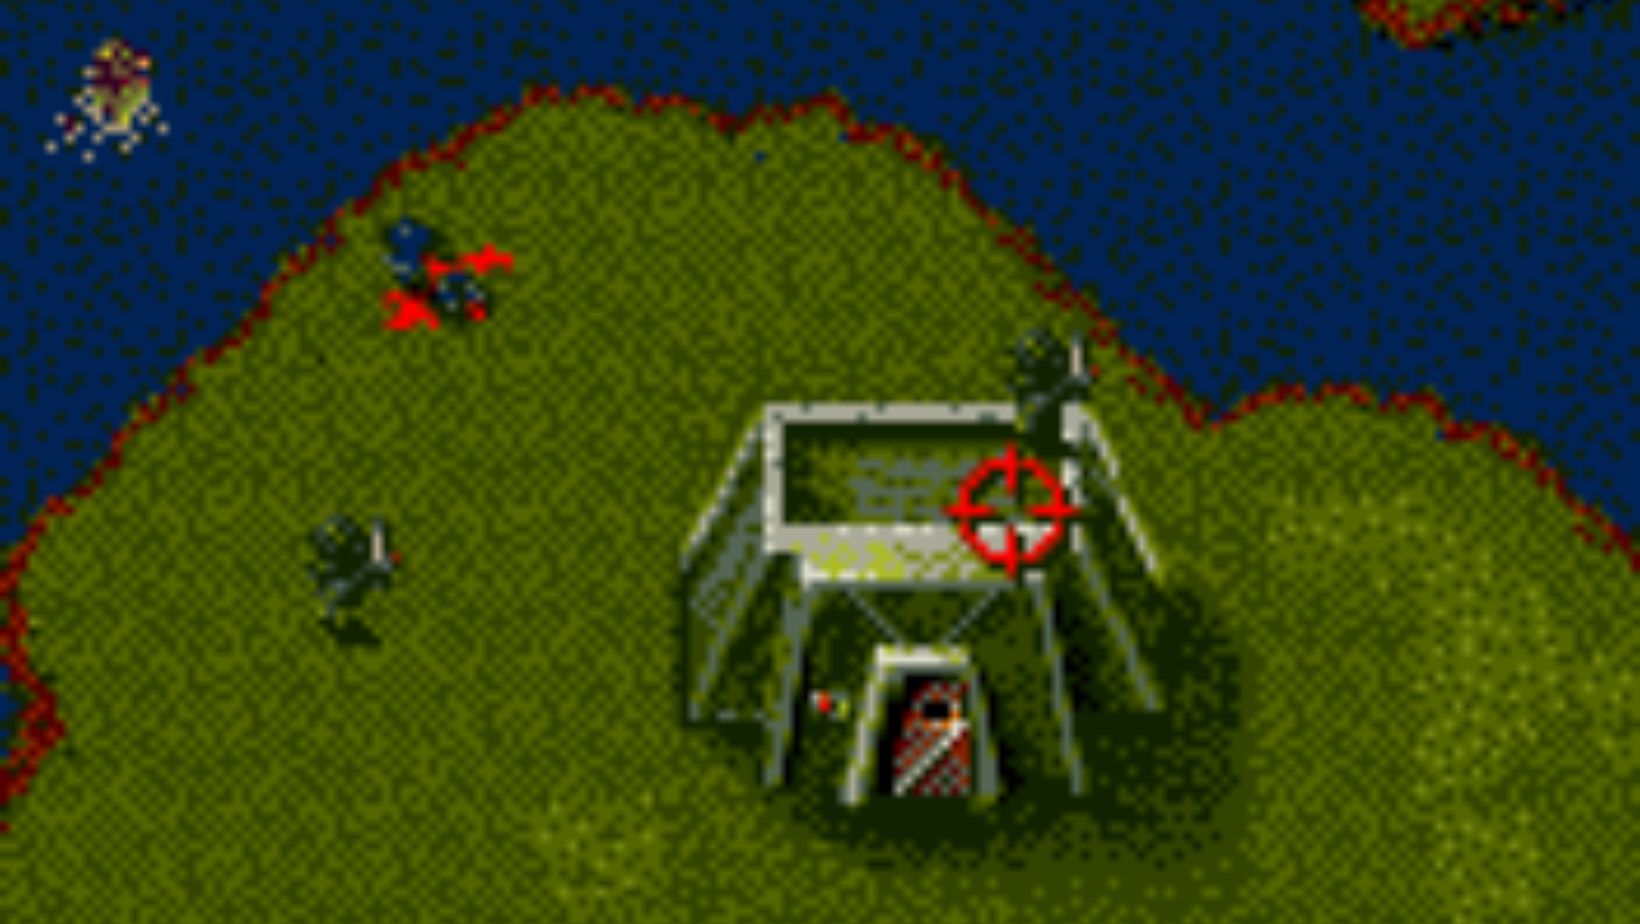 Pixelated action from Sensible Software's "Cannon Fodder" 